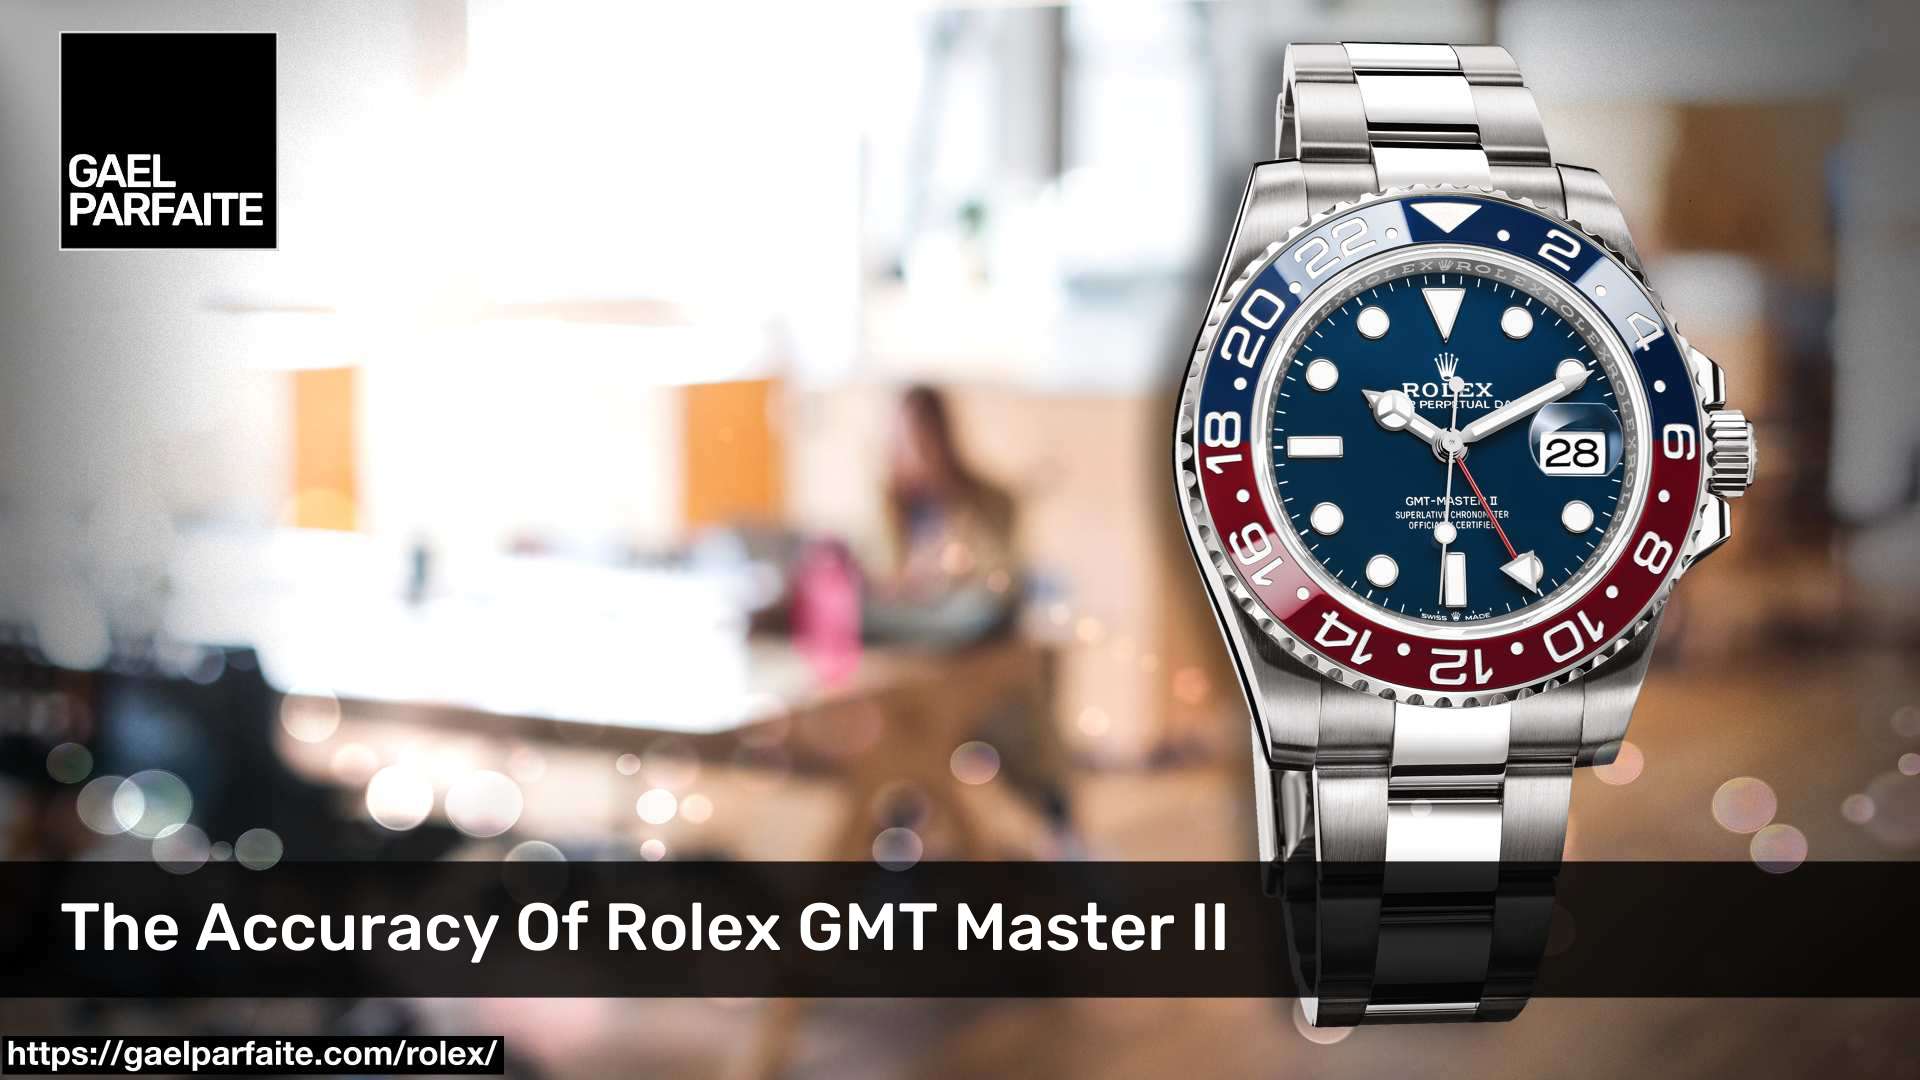 The Accuracy Of Rolex GMT Master II